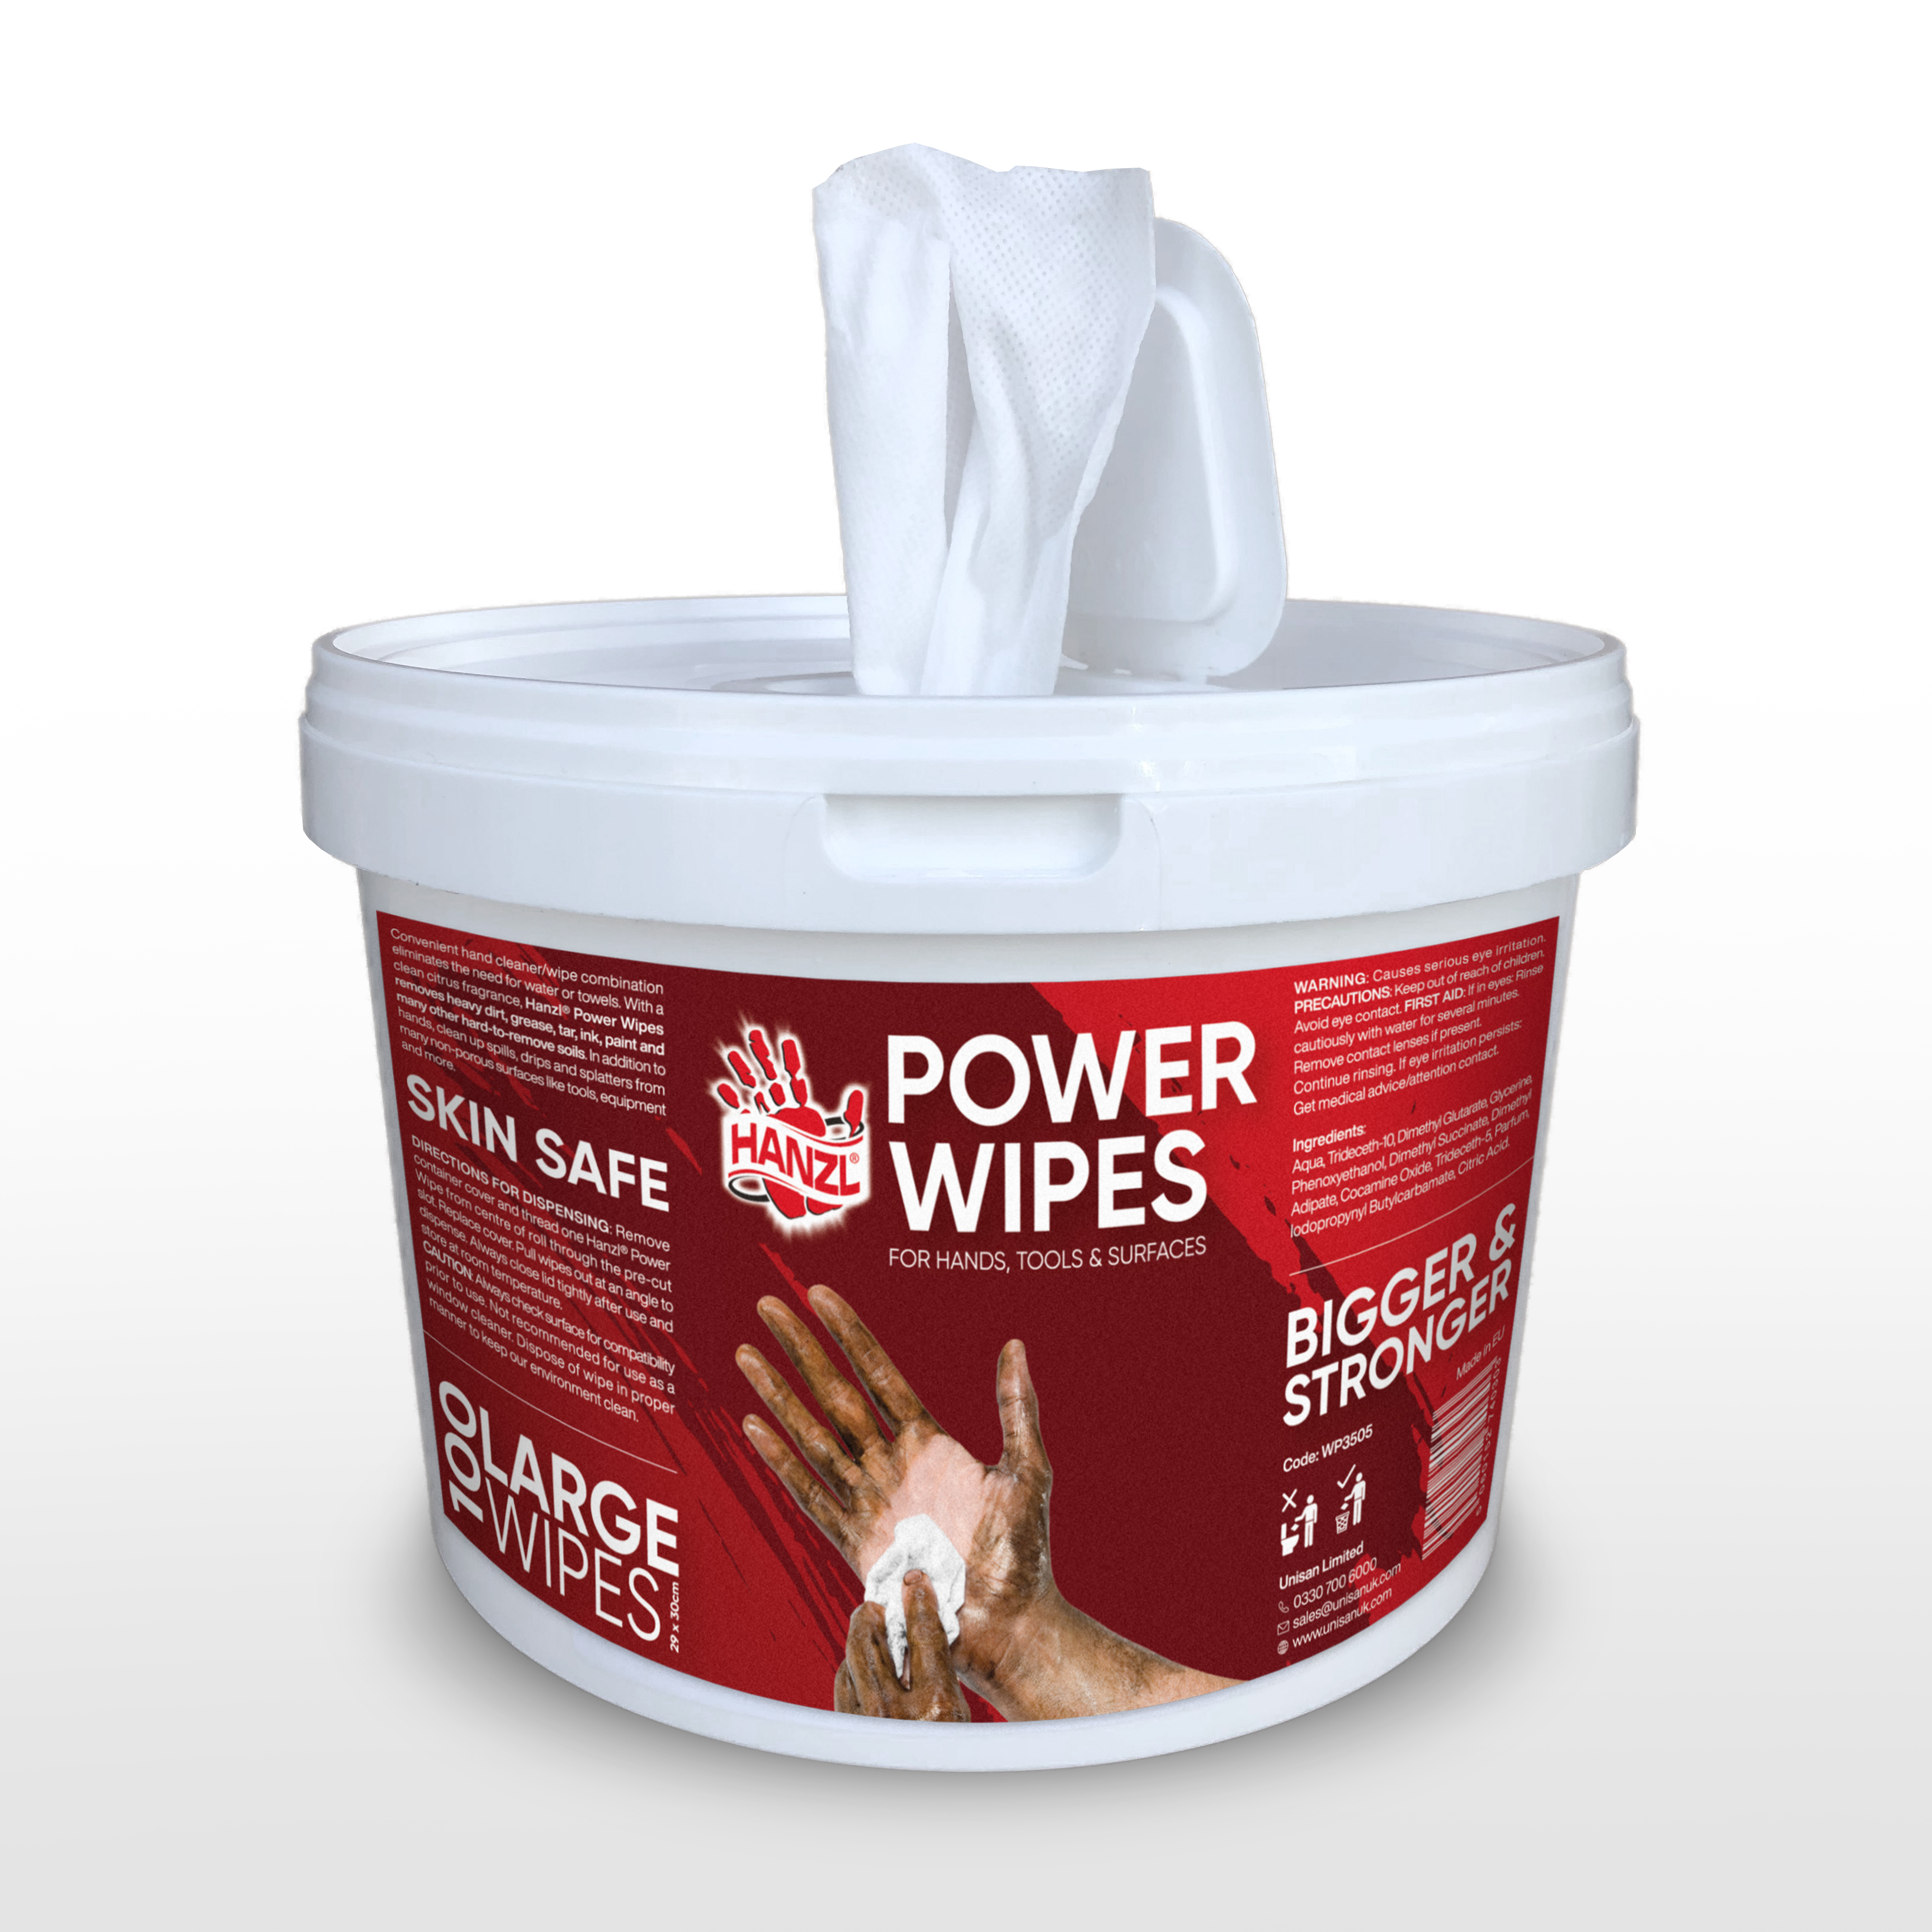 Hanzl heavy duty Power Wipes for hands, surfaces, tools and equipment